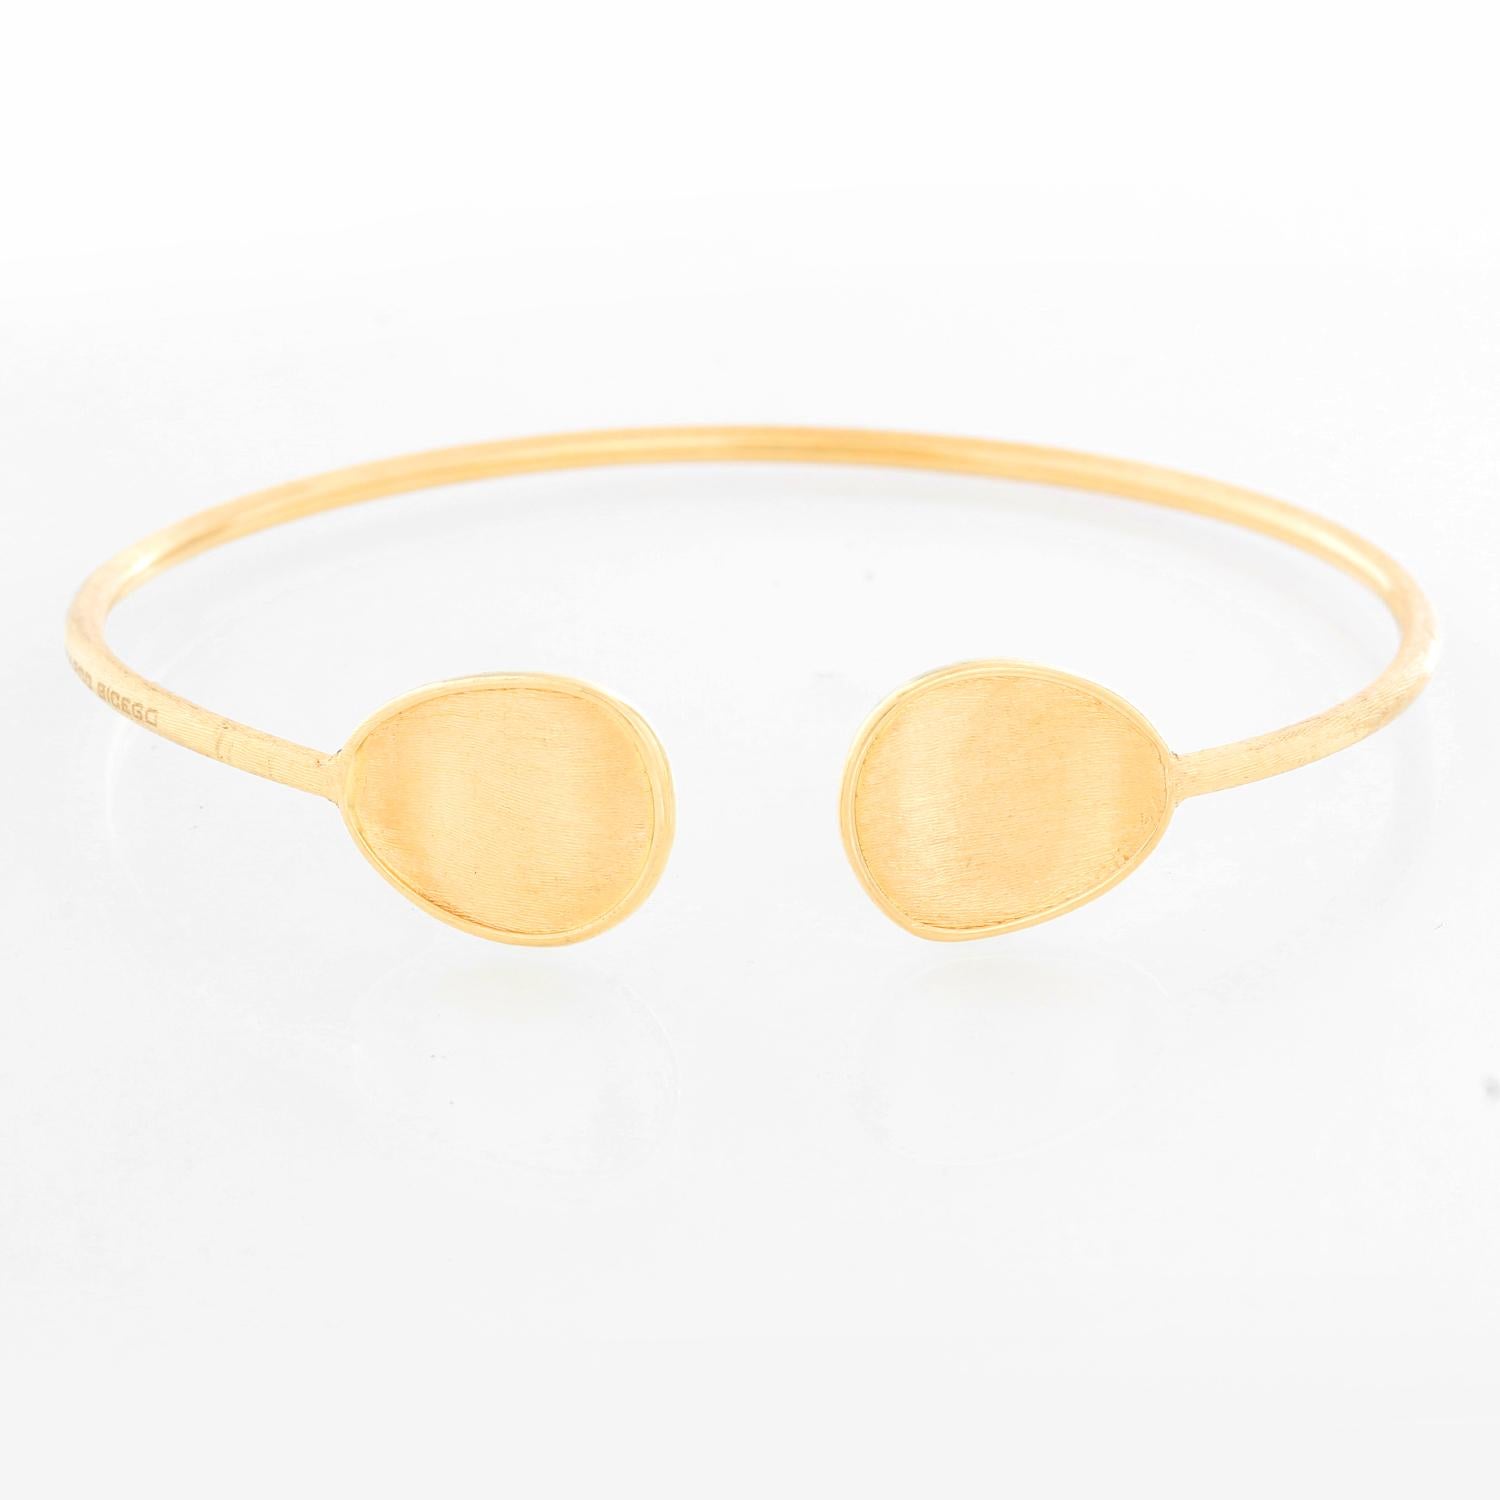 18K Yellow Gold Brushed Cuff Bracelet - Beautiful brushed gold cuff measuring 6 1/2 inch wrist. Made in Italy. Hallmarks include 750 and 2616 VI. 